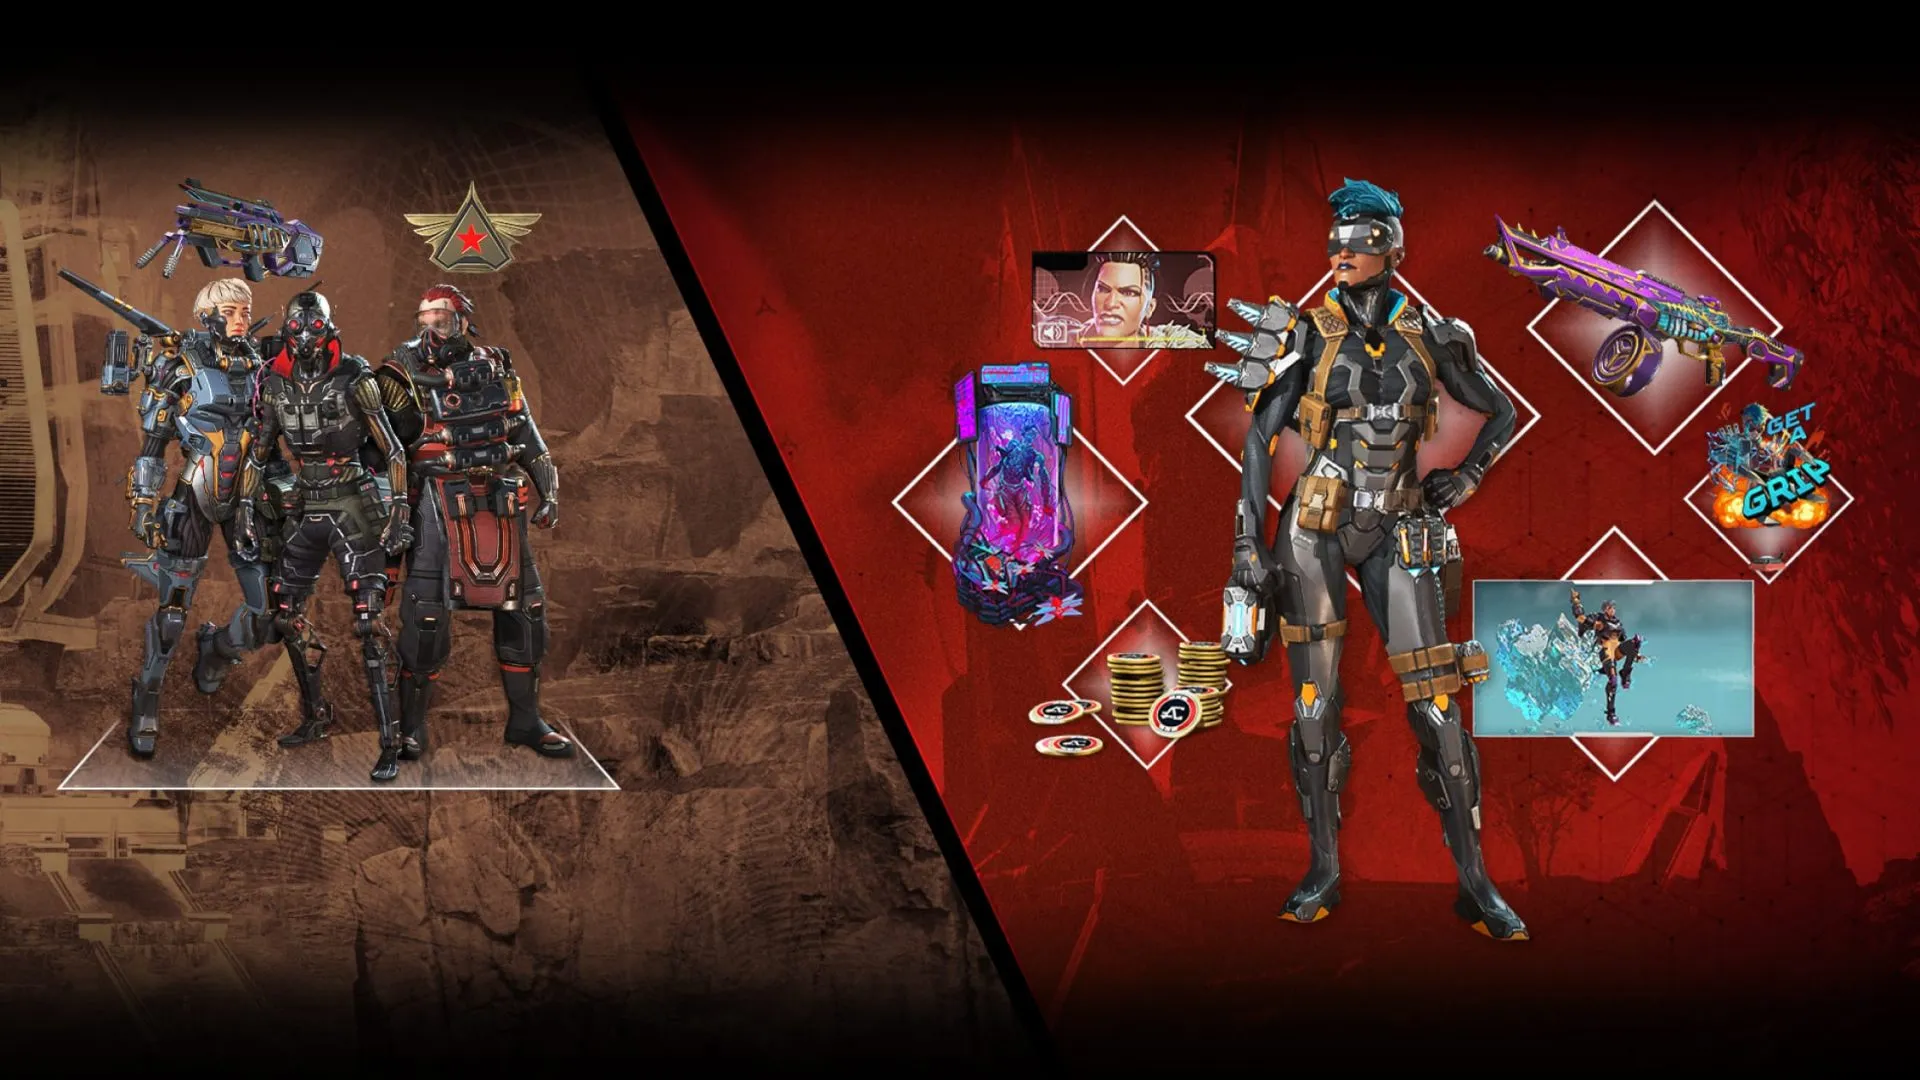 Apex Legends Cross-Progression Is Getting Done But No Release